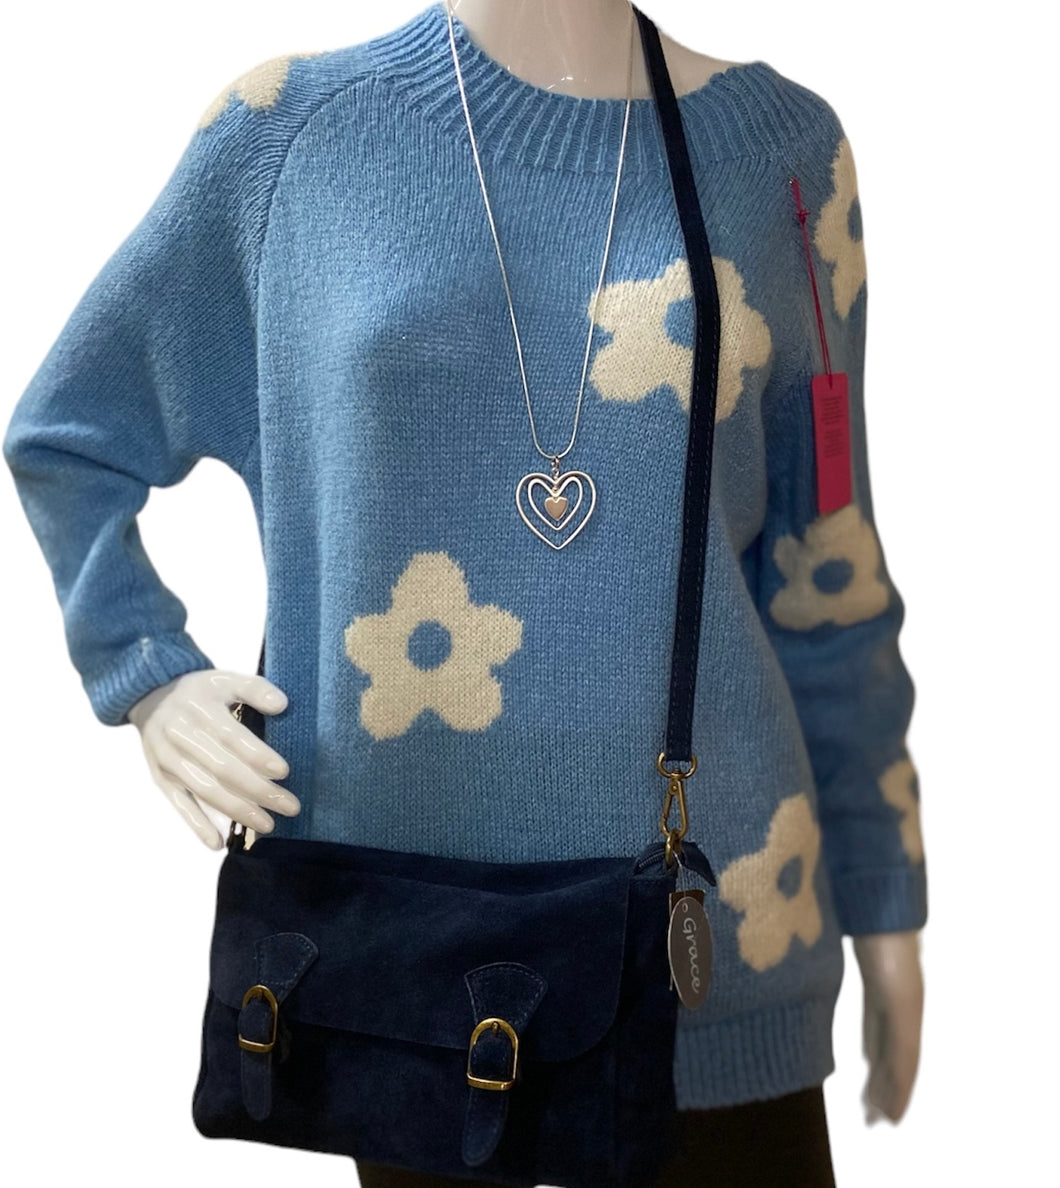 Flower jumper - Made in Italy